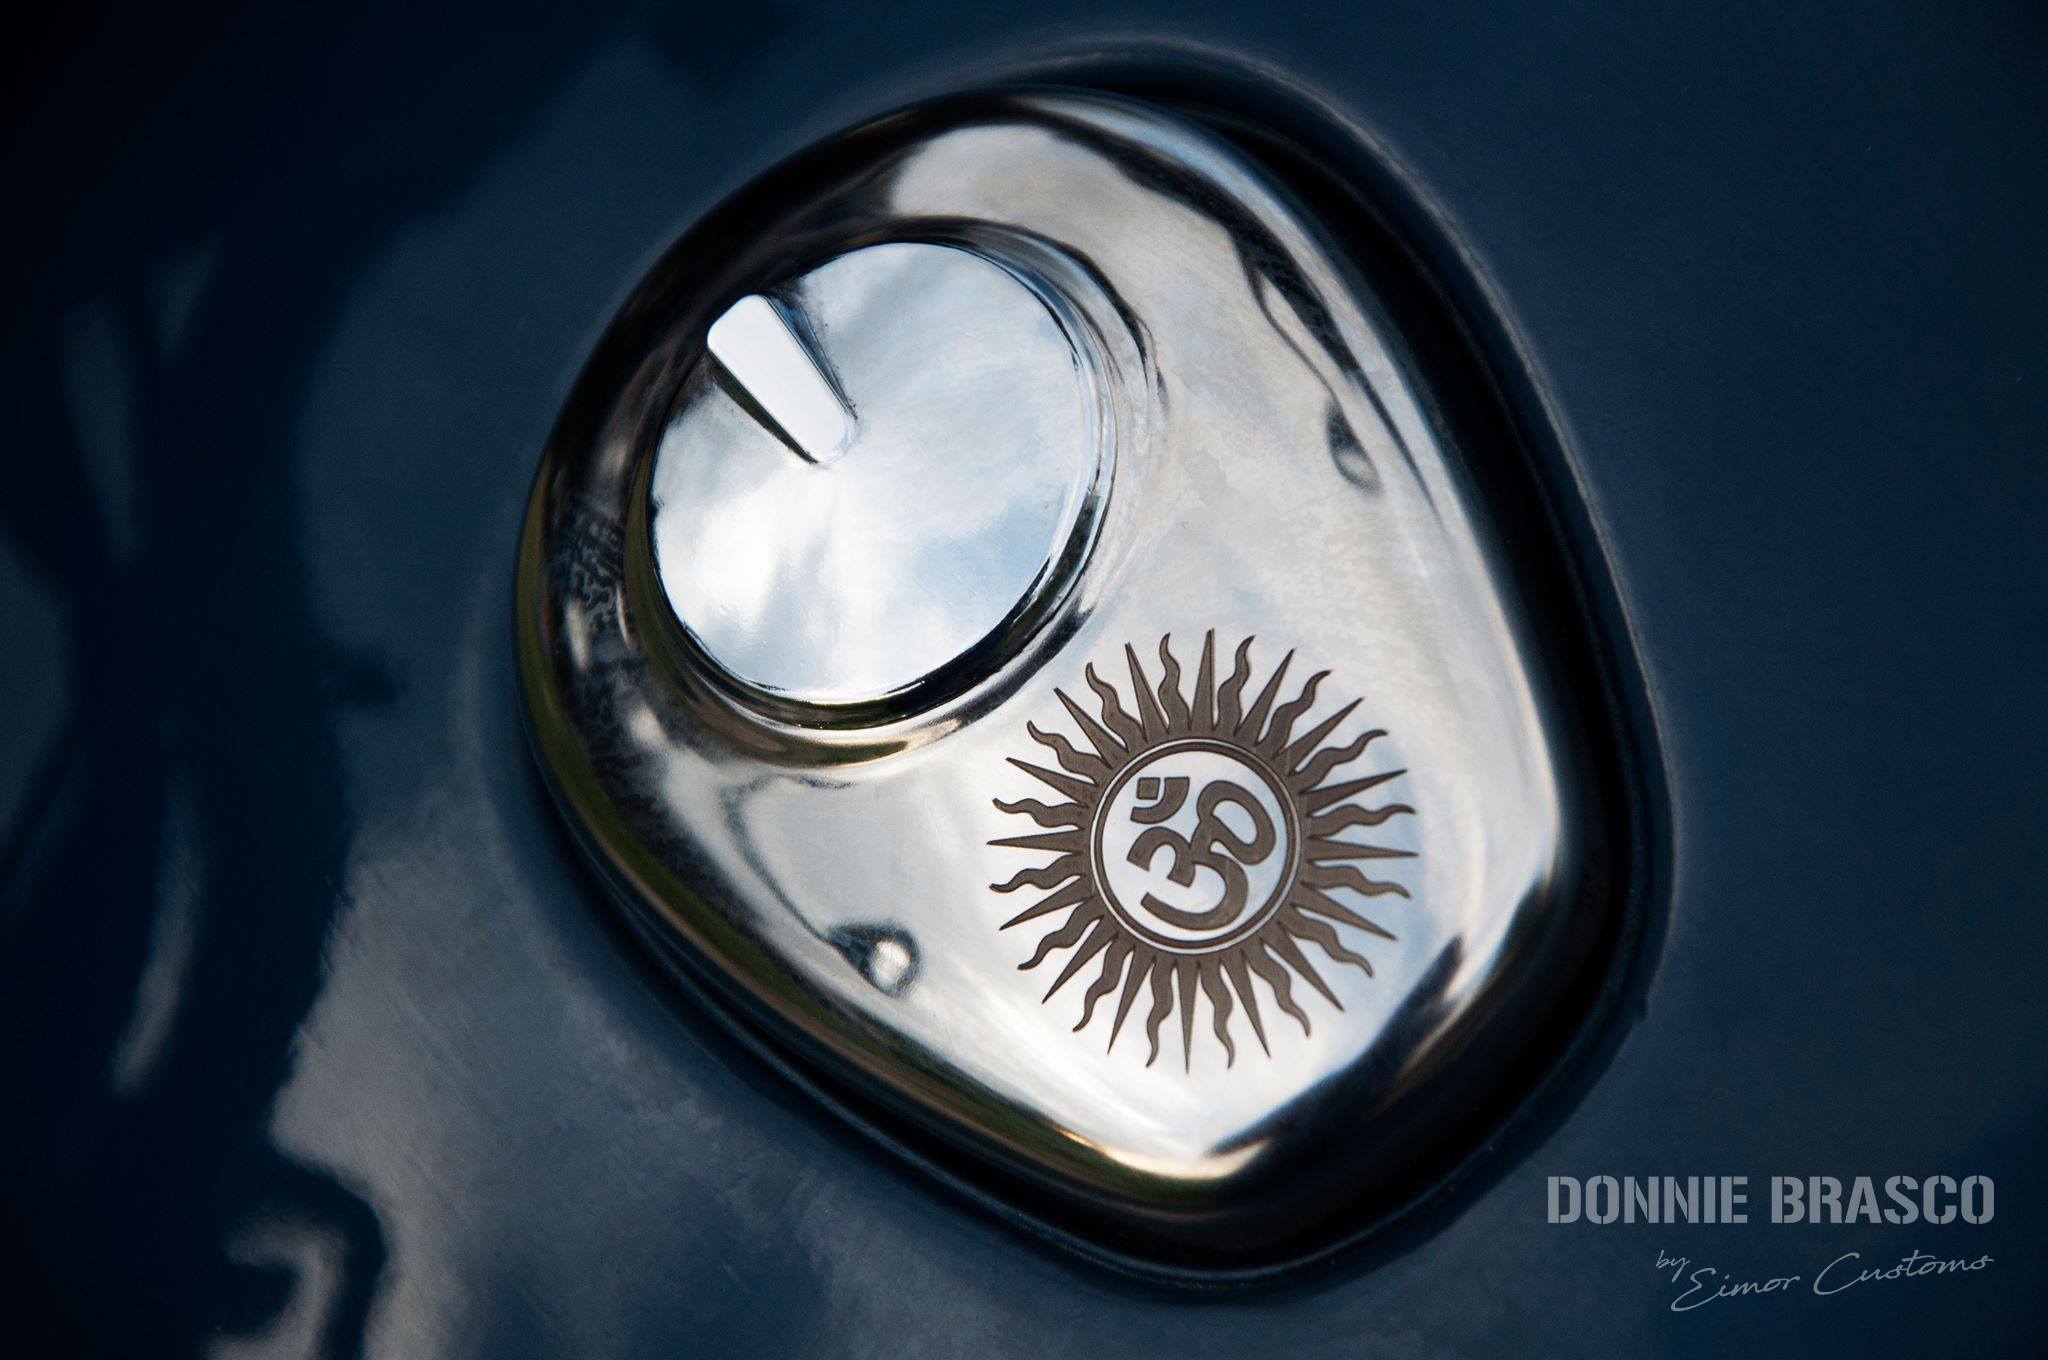 EIMOR Royal Enfield Classic 'Donnie Brasco' Details and Photos - close-up